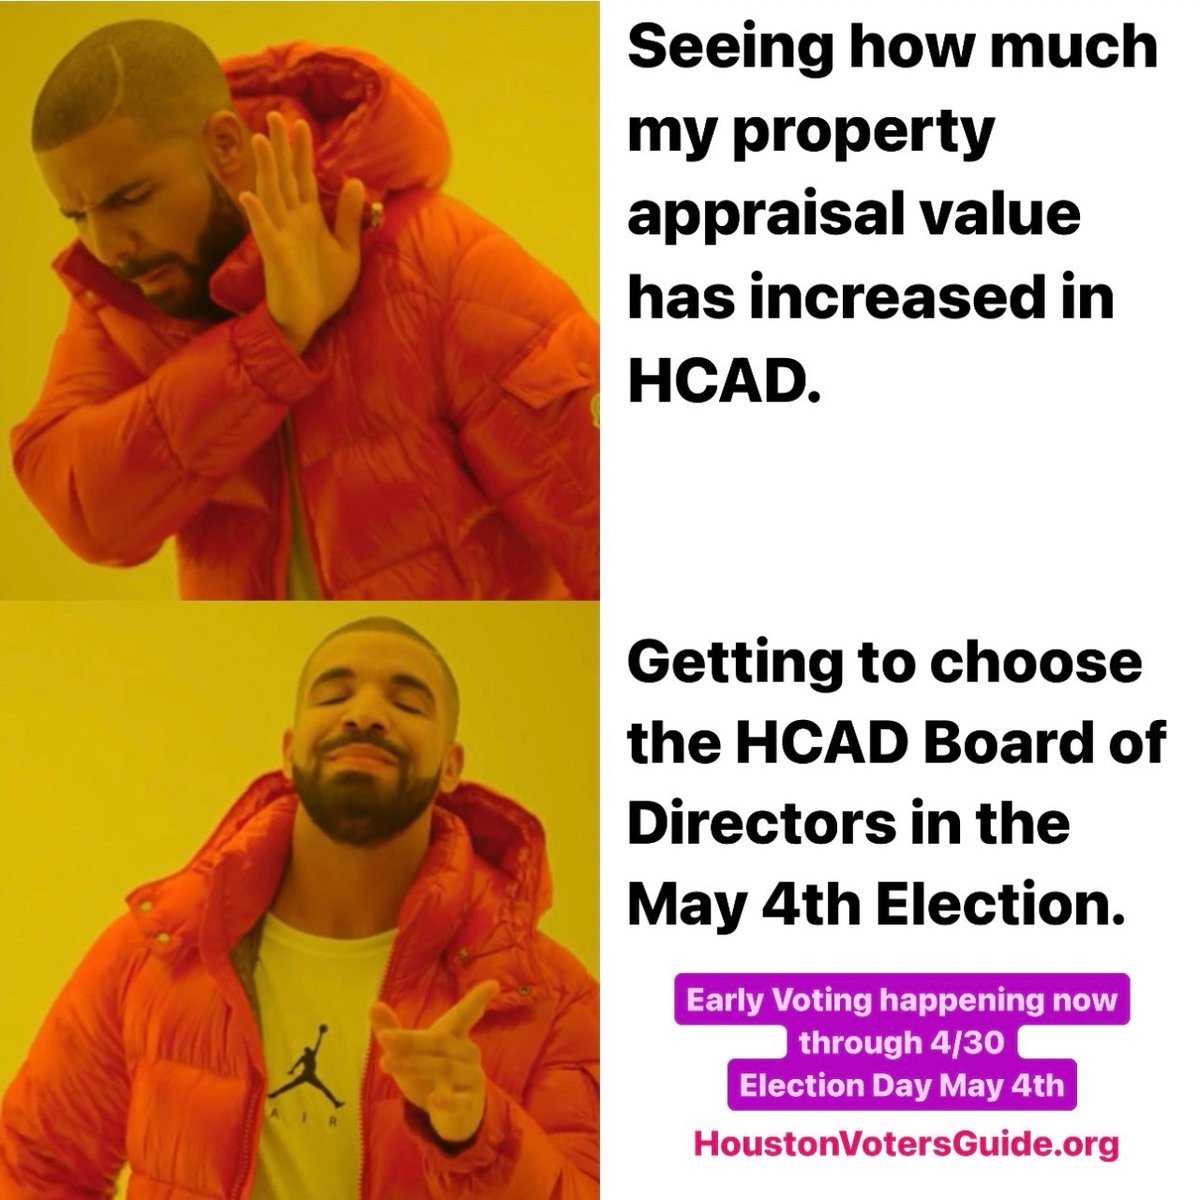 Don’t let this opportunity pass you by! The decisions made by HCAD have a huge impact on everyone in Harris county… not just property owners! The taxes that result from commercial appraisal values get passed on to consumers like YOU every day. Be a Houston Voter! #lwvhouston